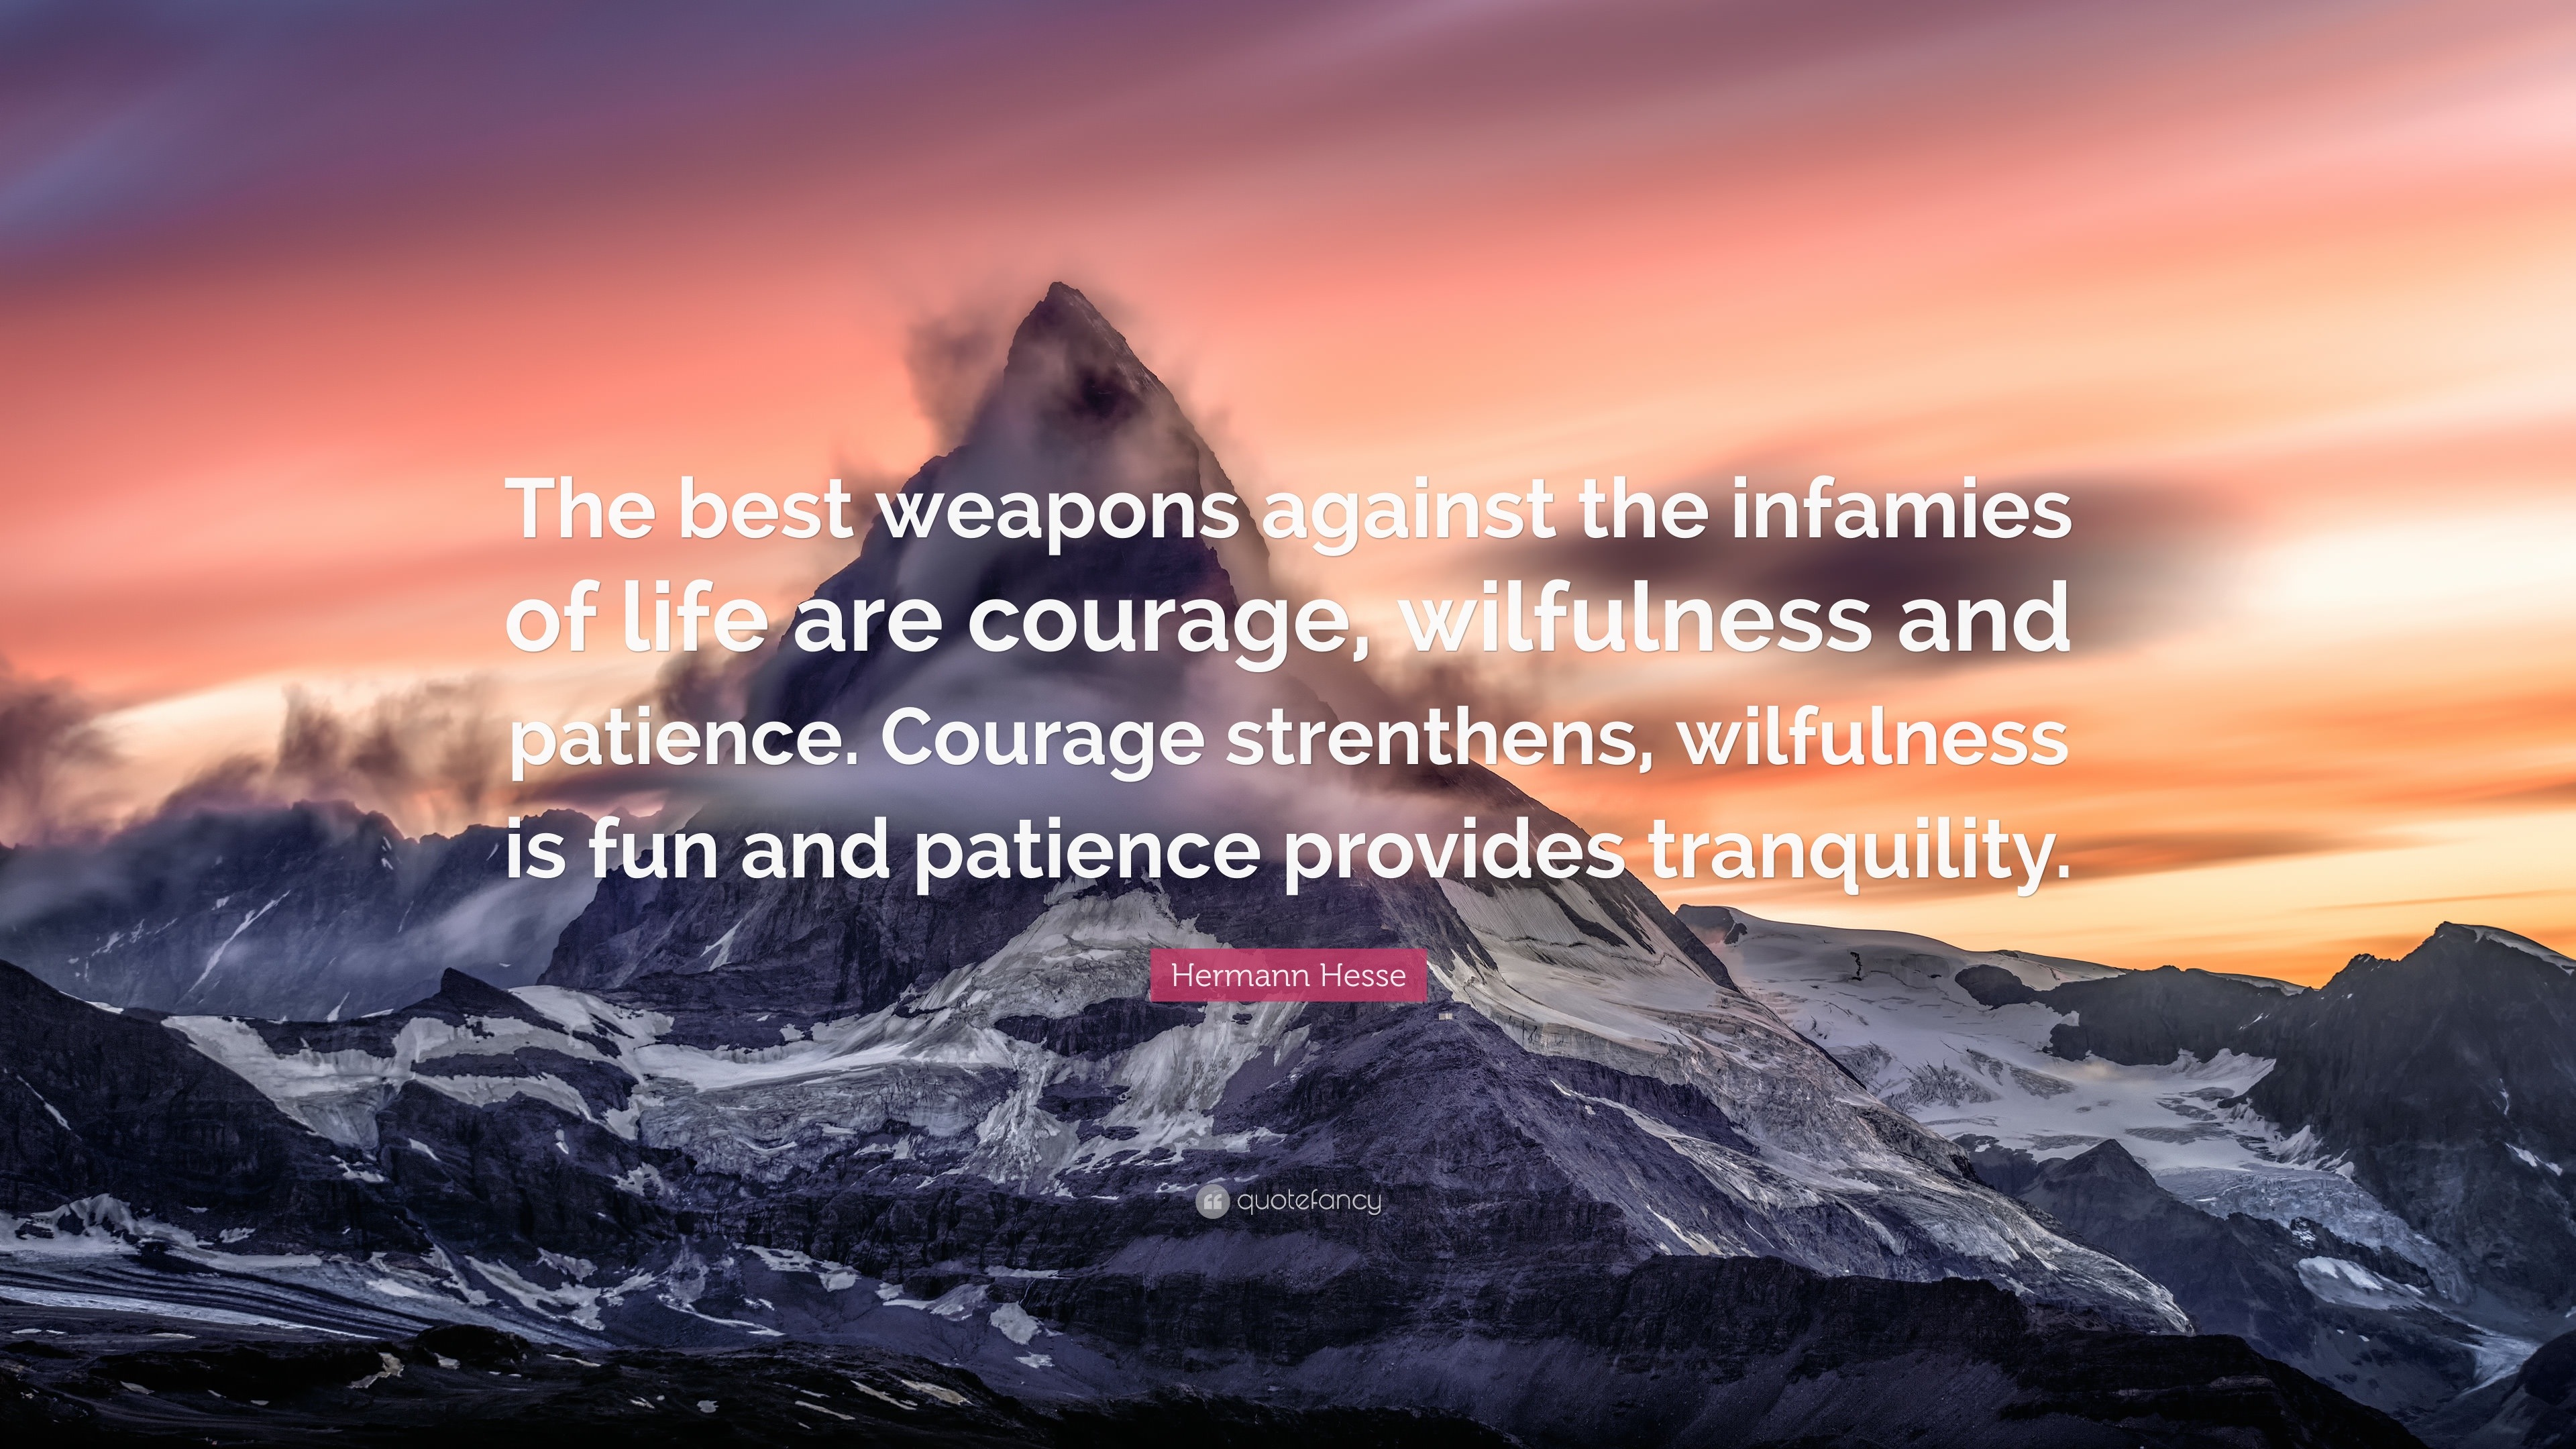 Hermann Hesse Quote: “The best weapons against the infamies of life are ...